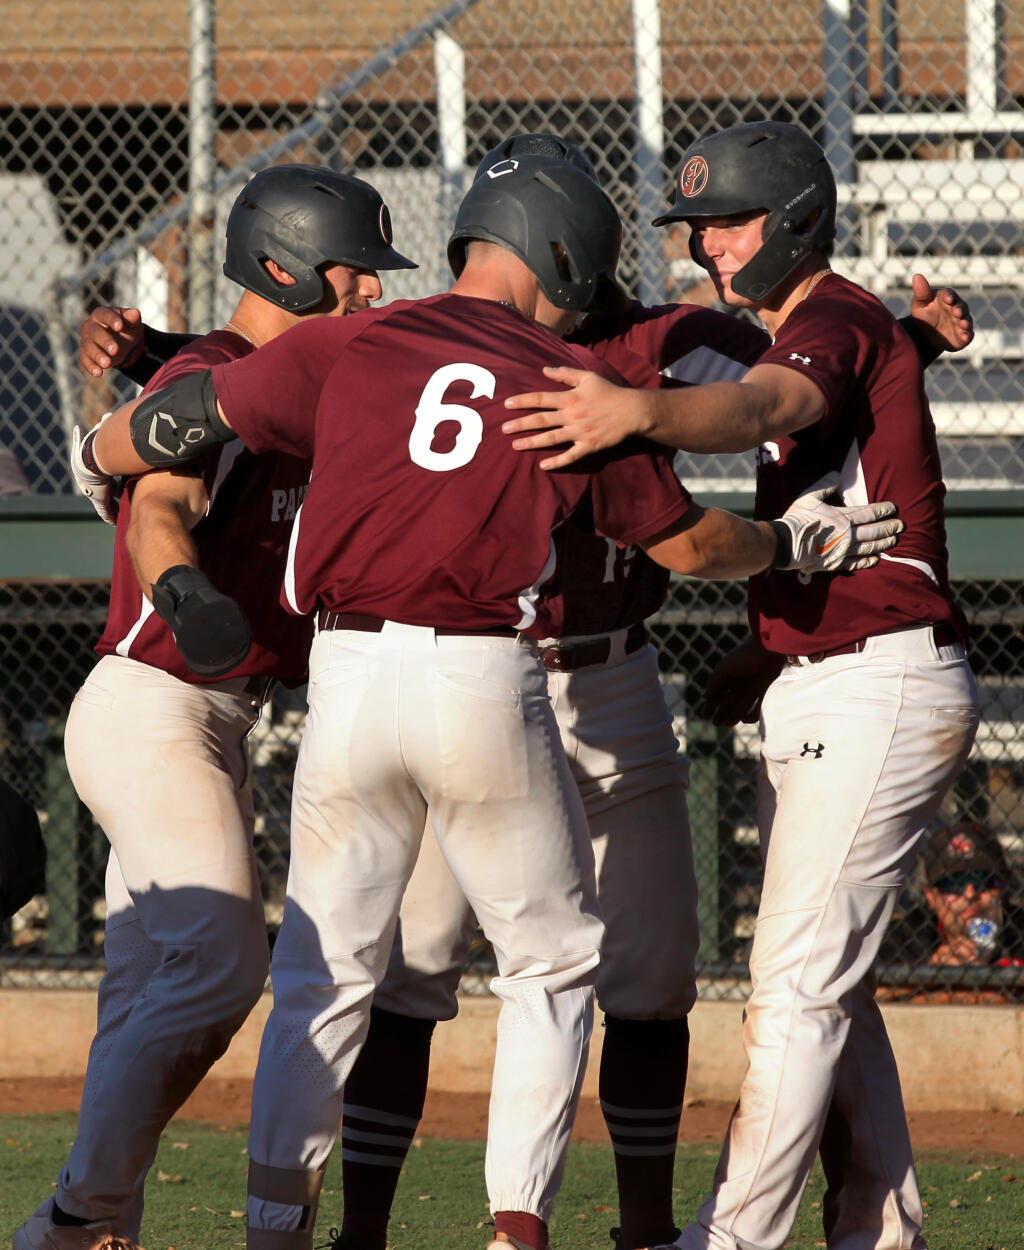 The Healdsburg Prune Packers’ Joey Kramer, center, celebrates with teammates after hitting a grand slam in the third inning against the Walnut Creek Crawdads on Tuesday, Aug. 2, 2022, in Healdsburg. (Darryl Bush / For The Press Democrat)